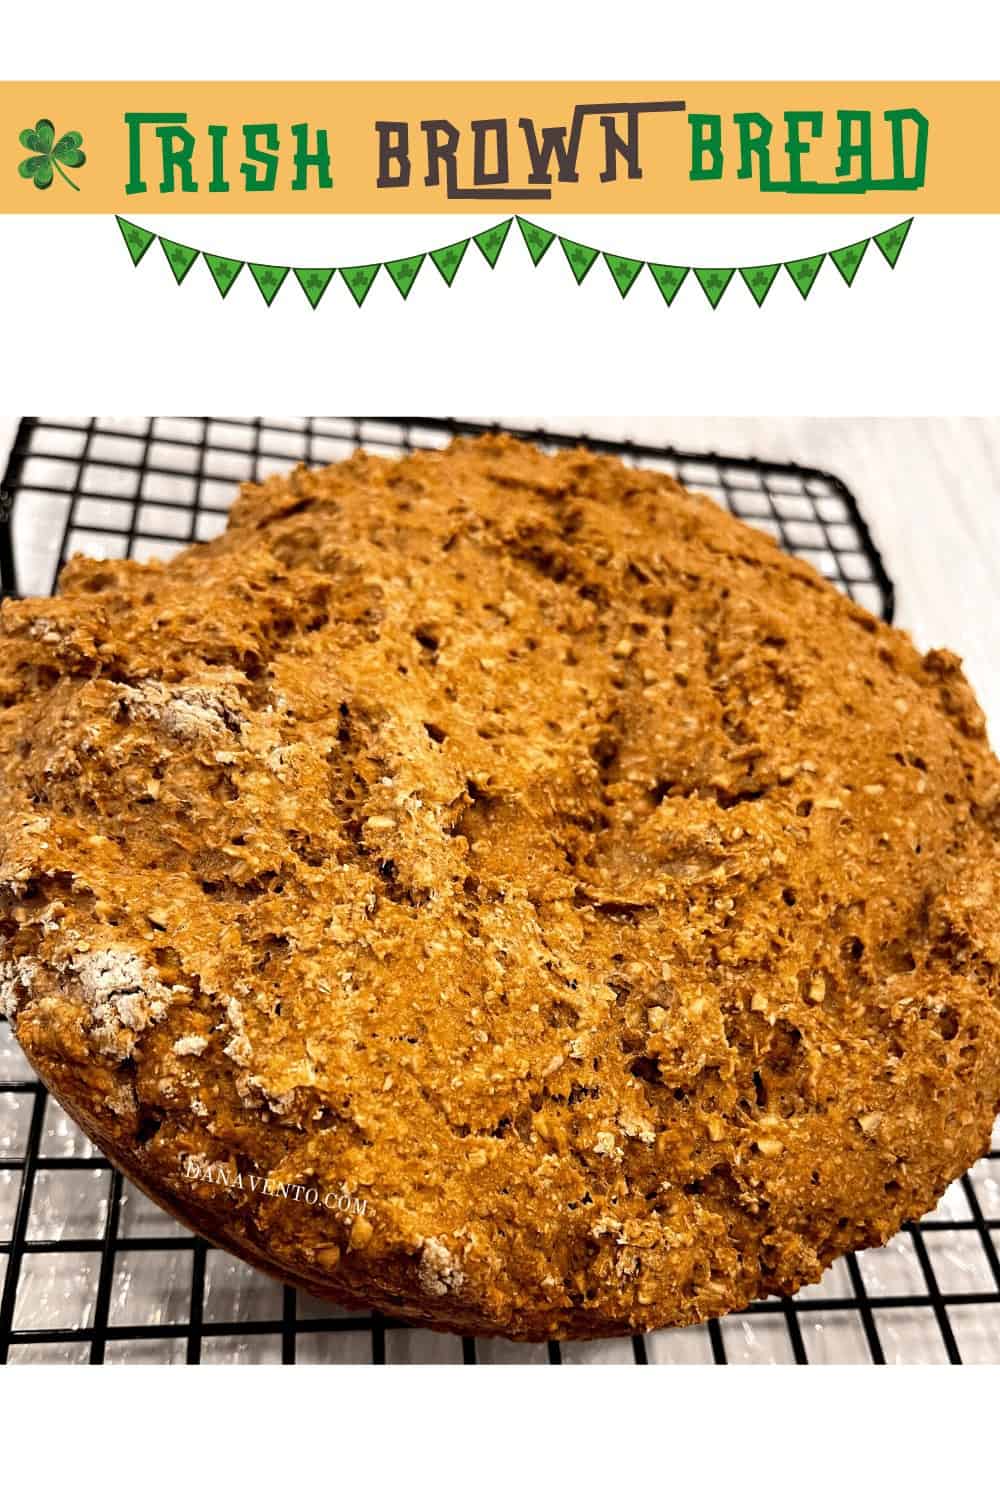 Irish Brown Bread on Cooling rack made with Pinhead oats